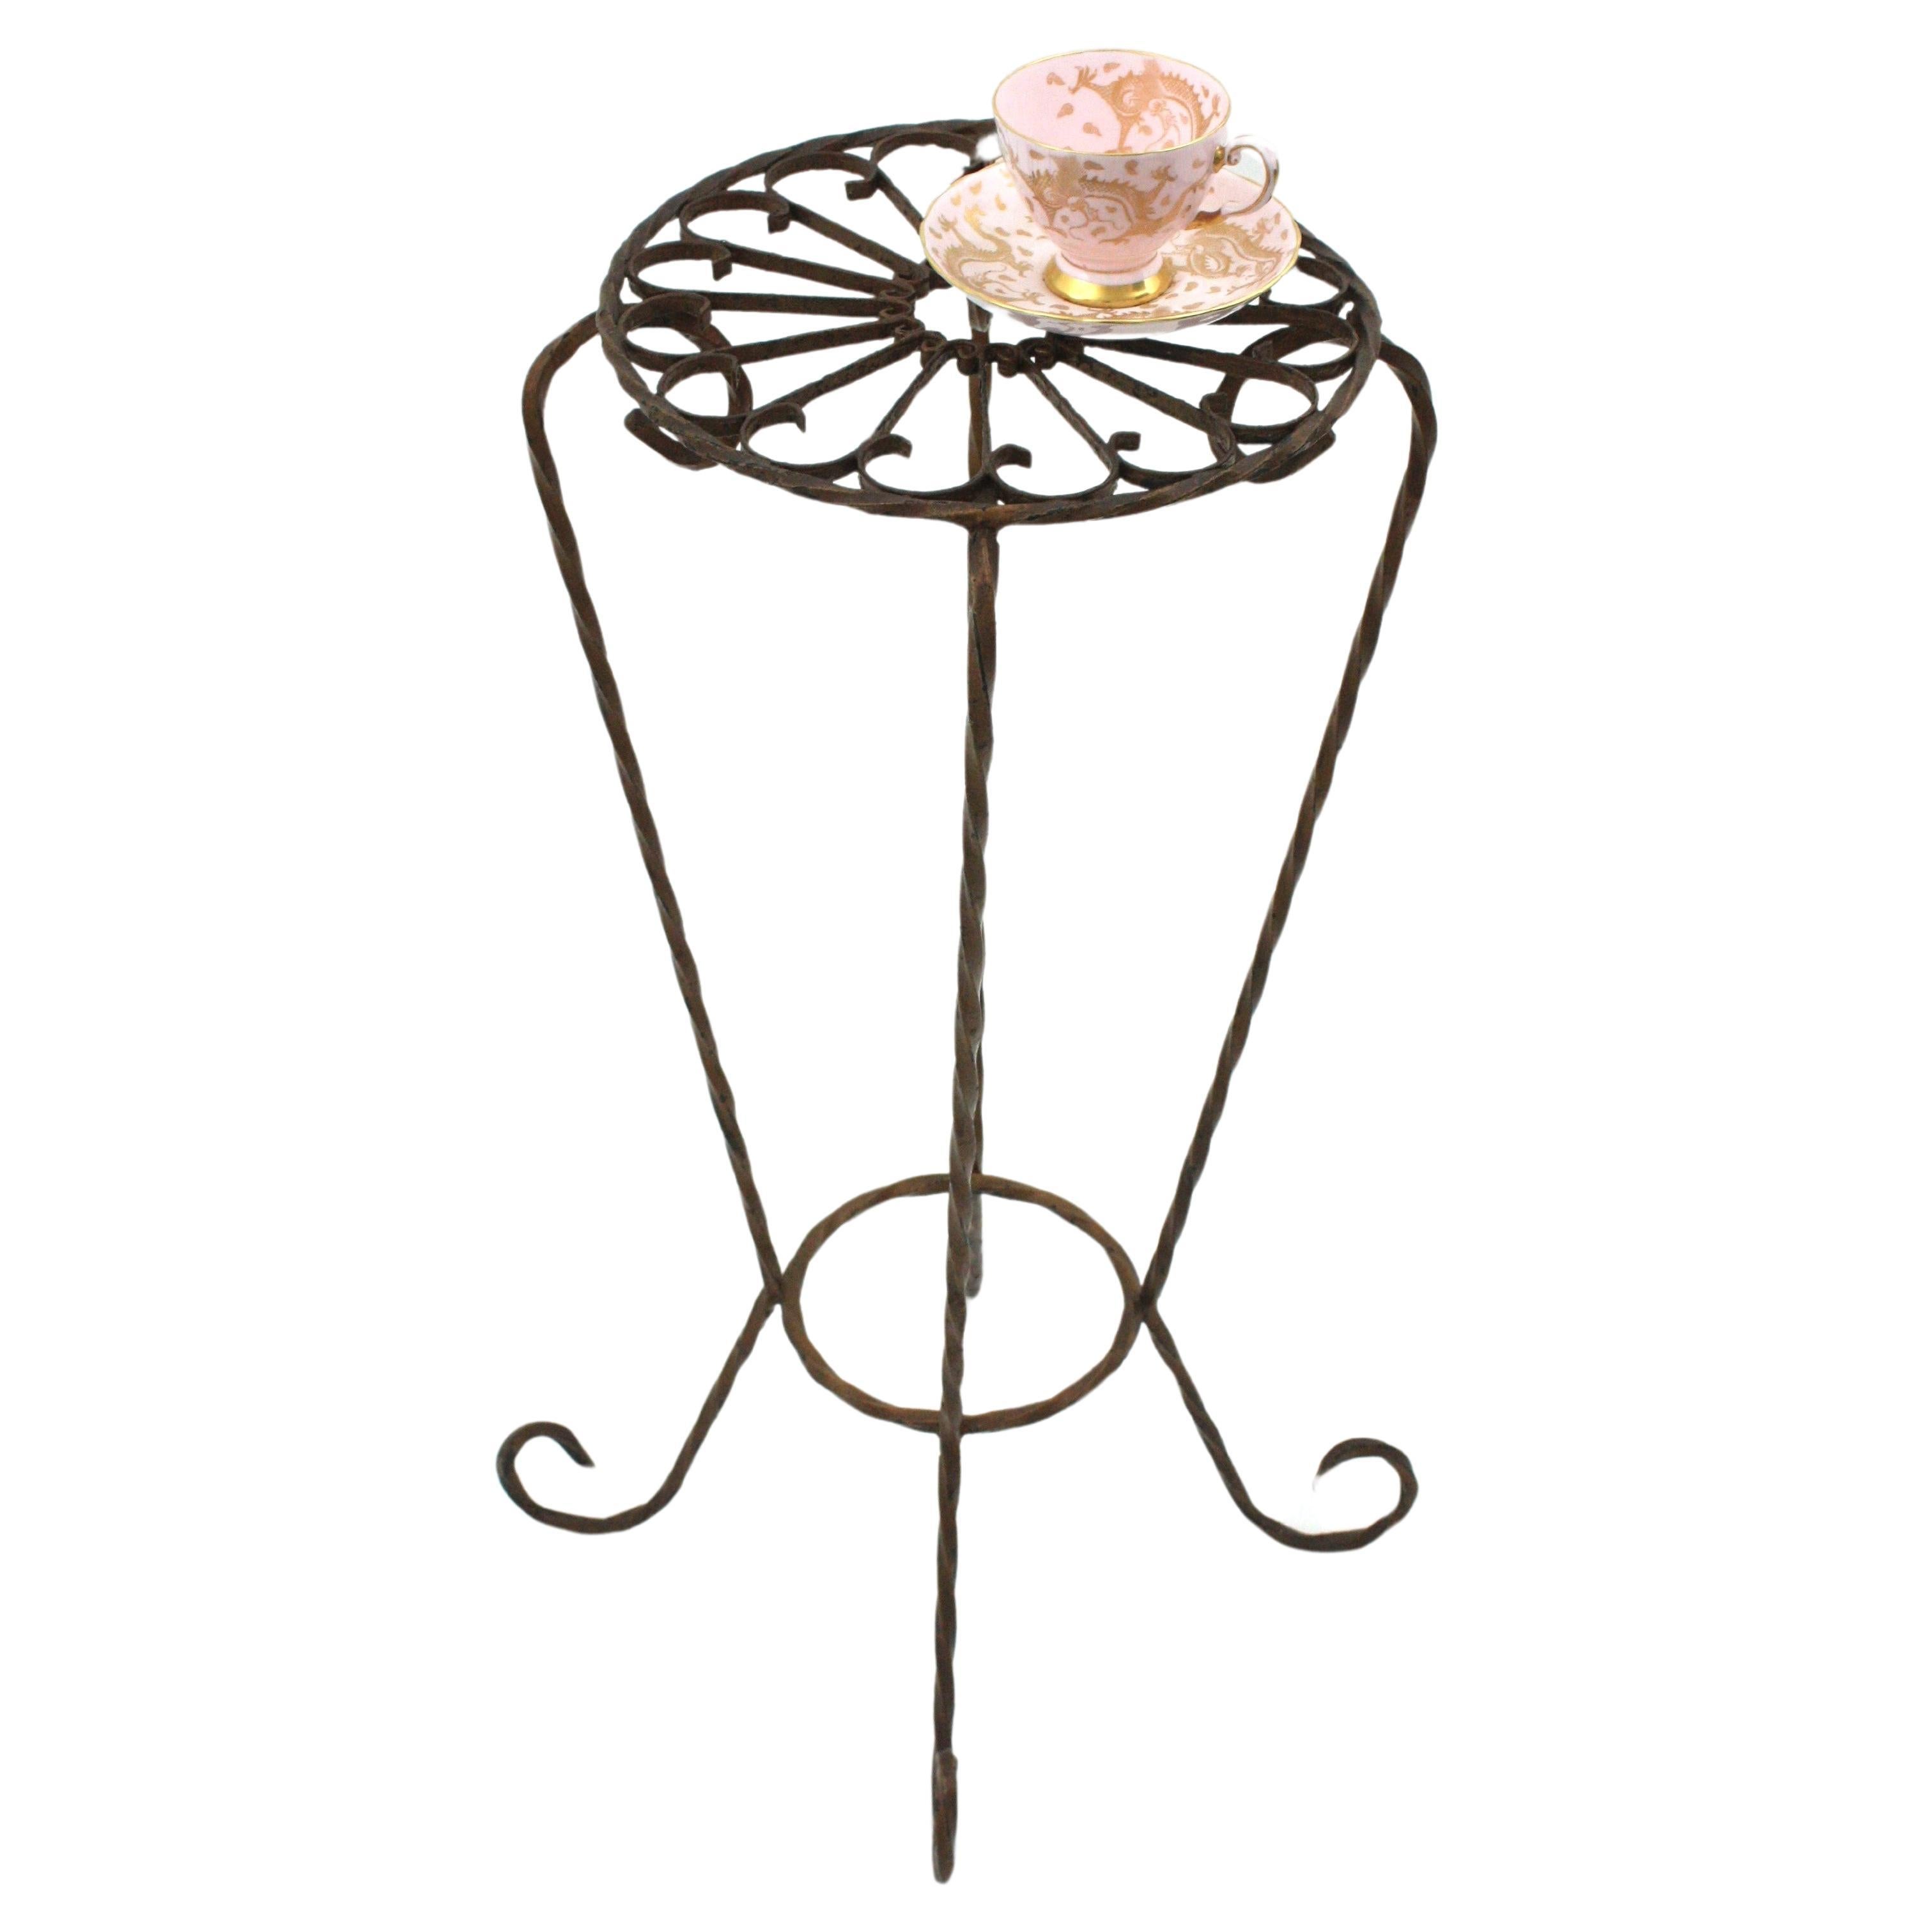 Forged Spanish Scrollwork Wrought Iron Side Table / Drinks Table, 1950s For Sale